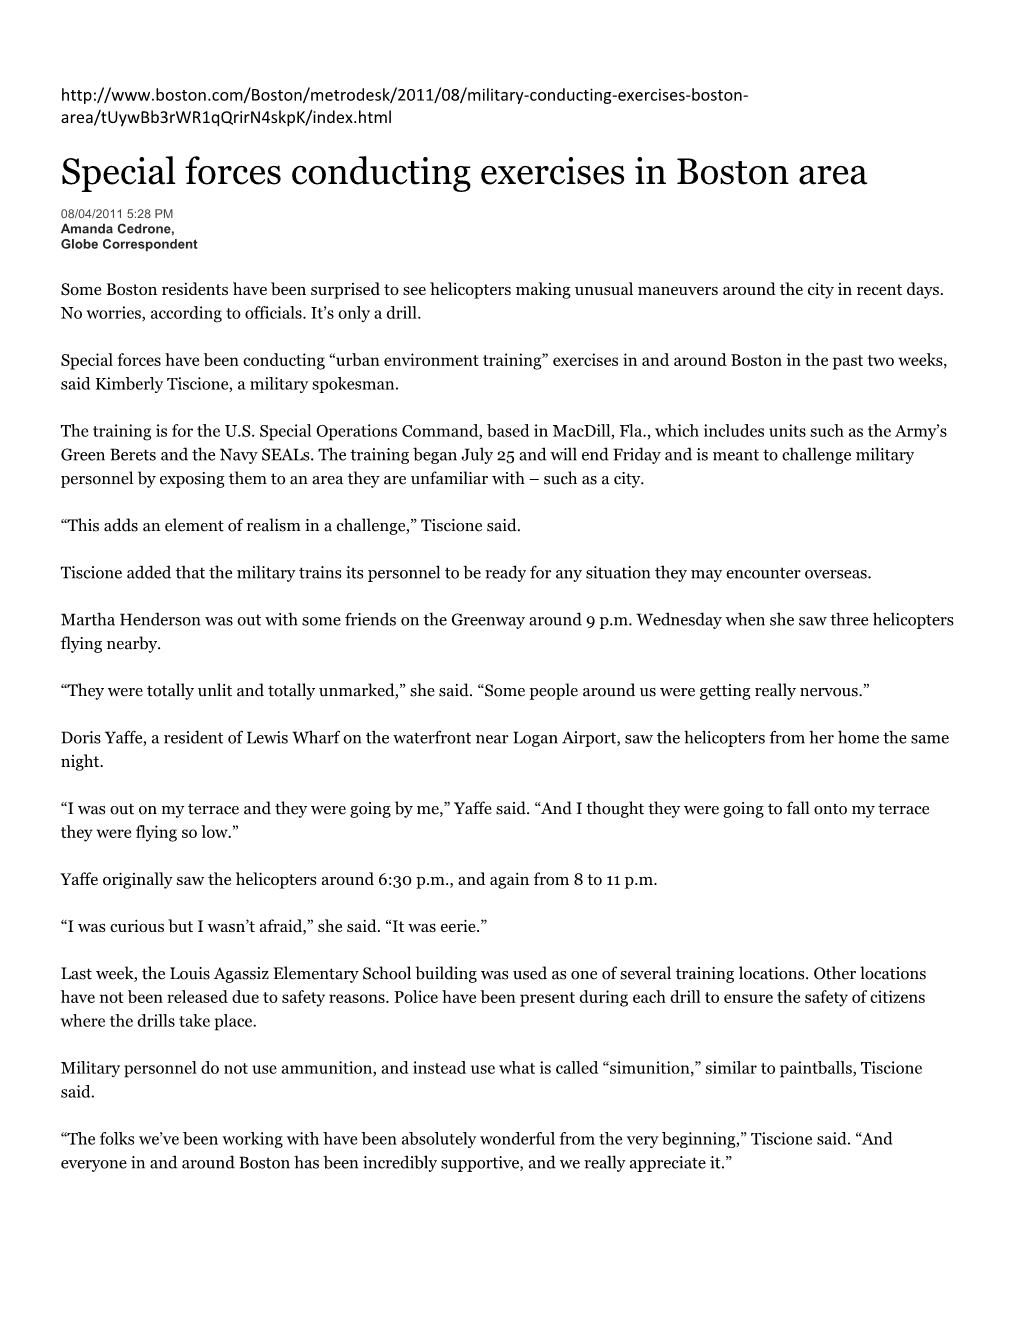 Special Forces Conducting Exercises in Boston Area